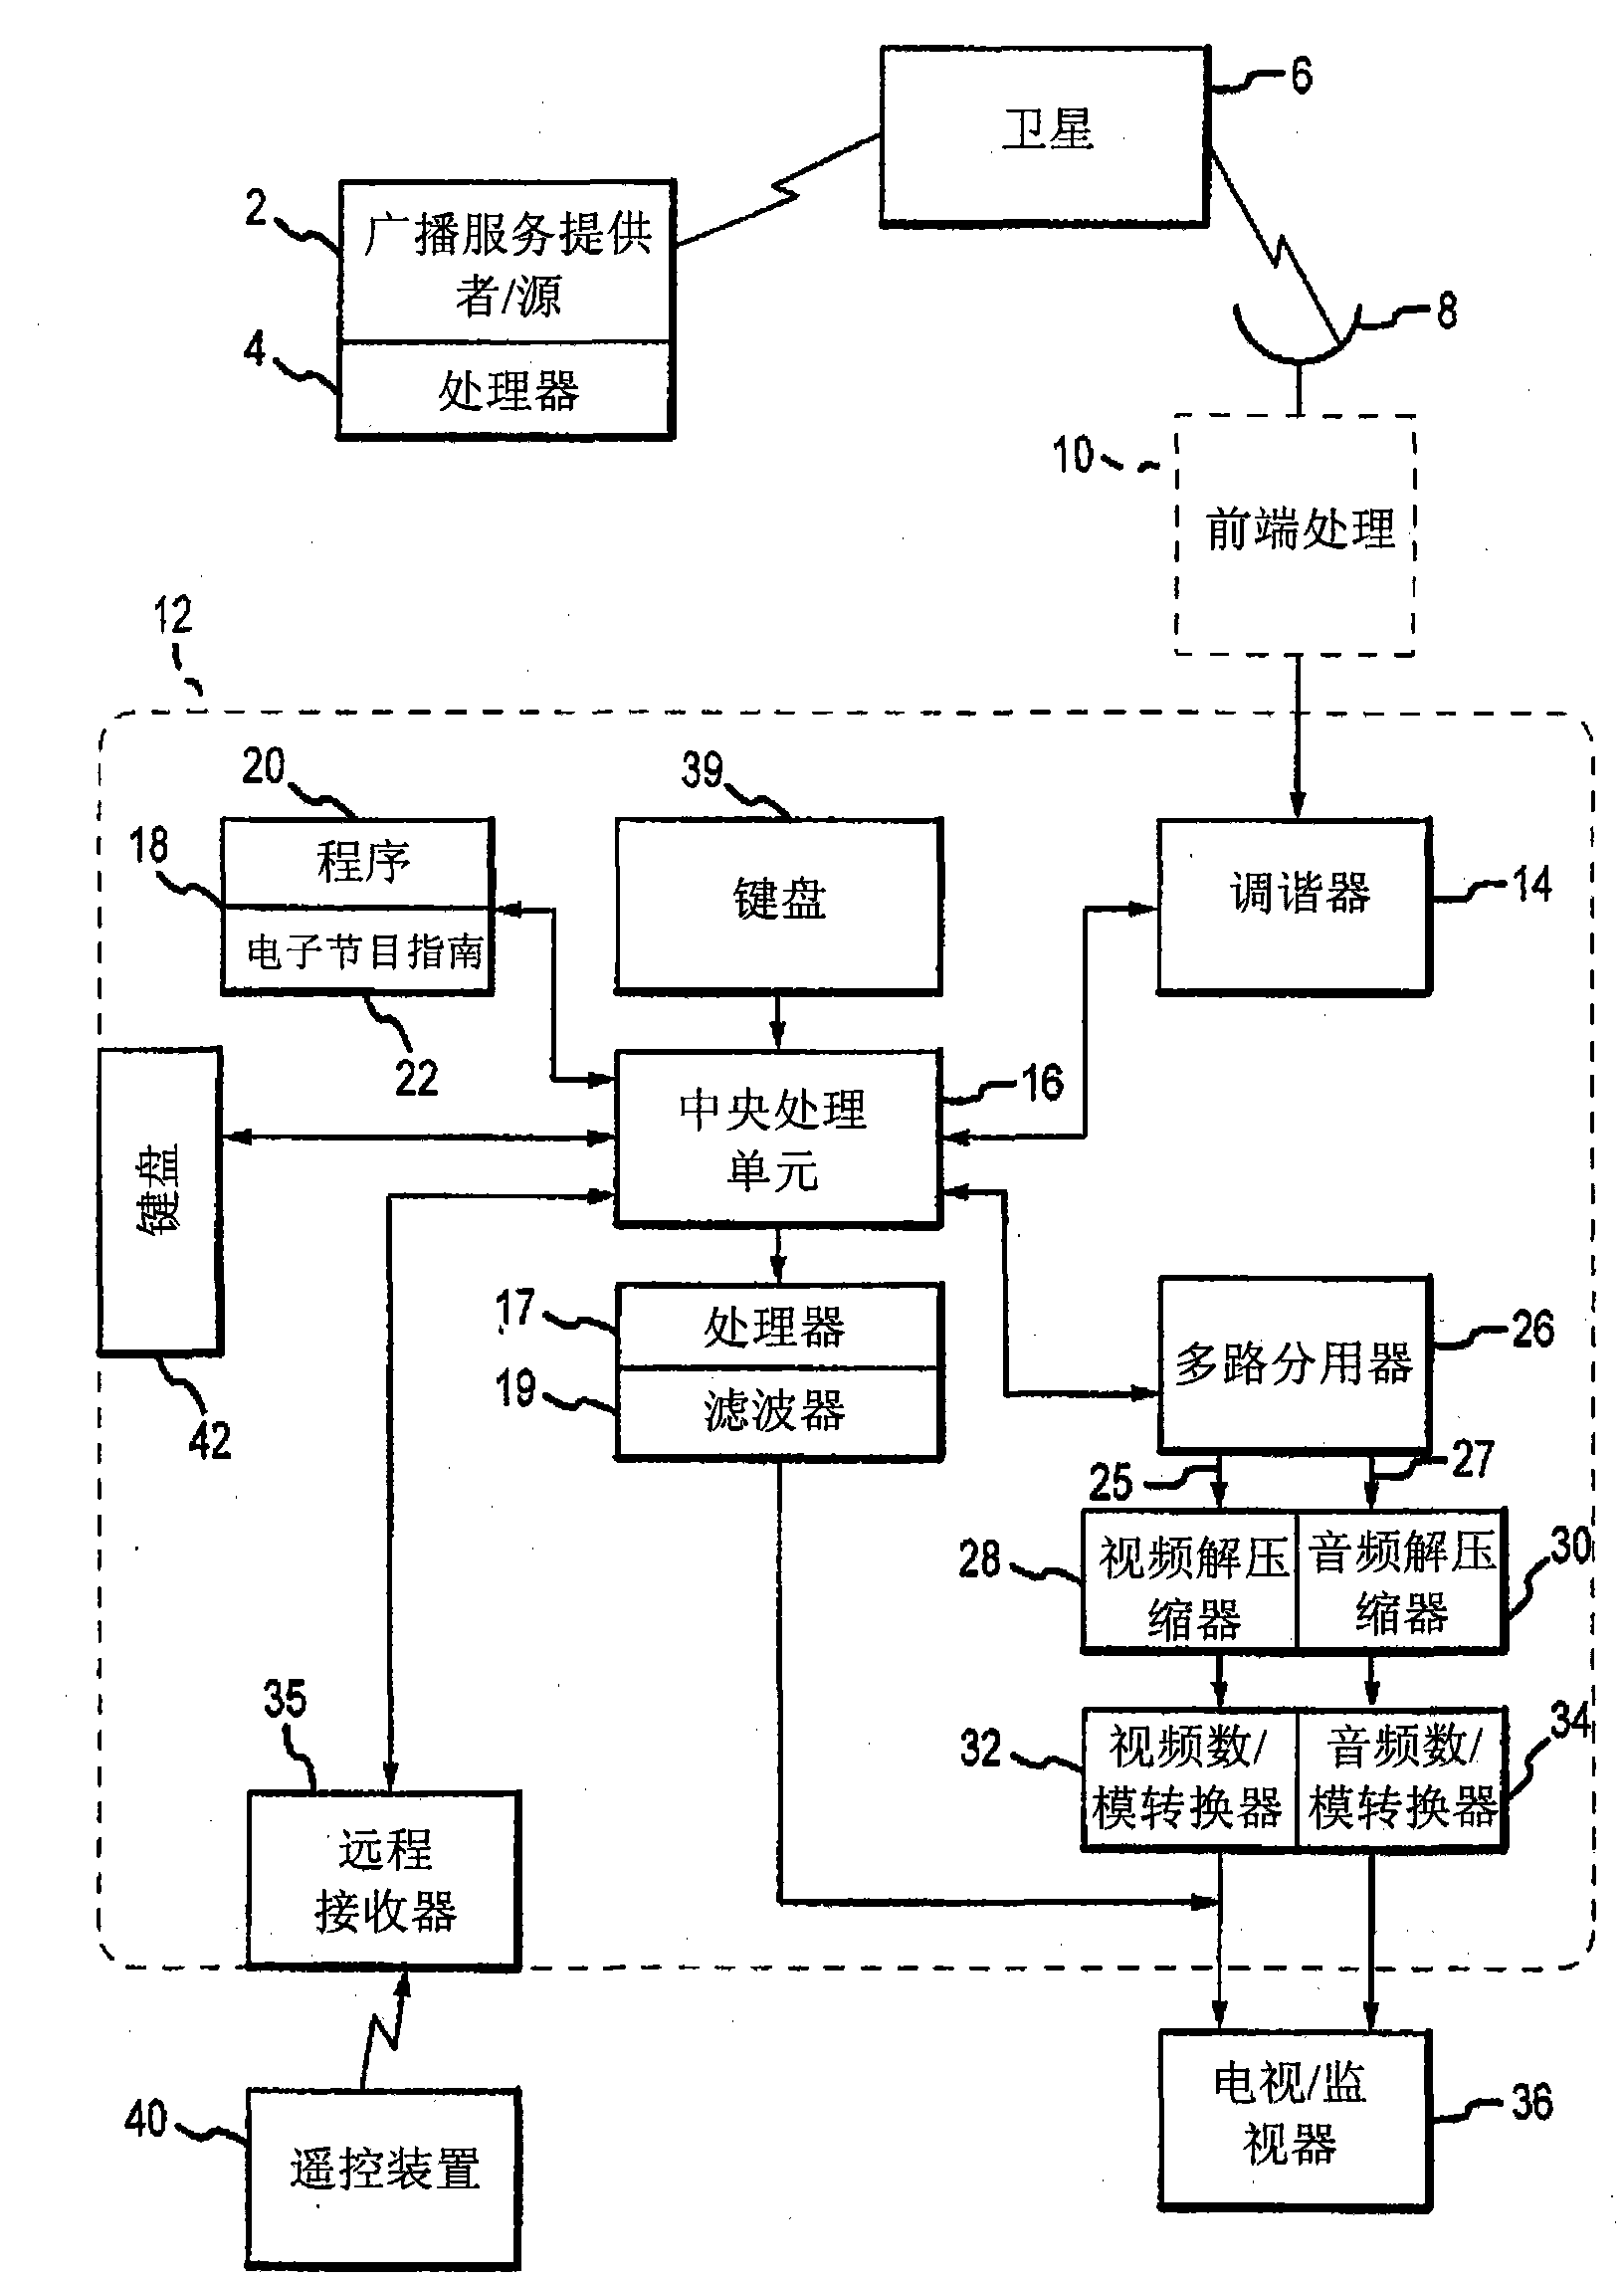 Systems and methods for generating and/or presenting a condensed list of channels